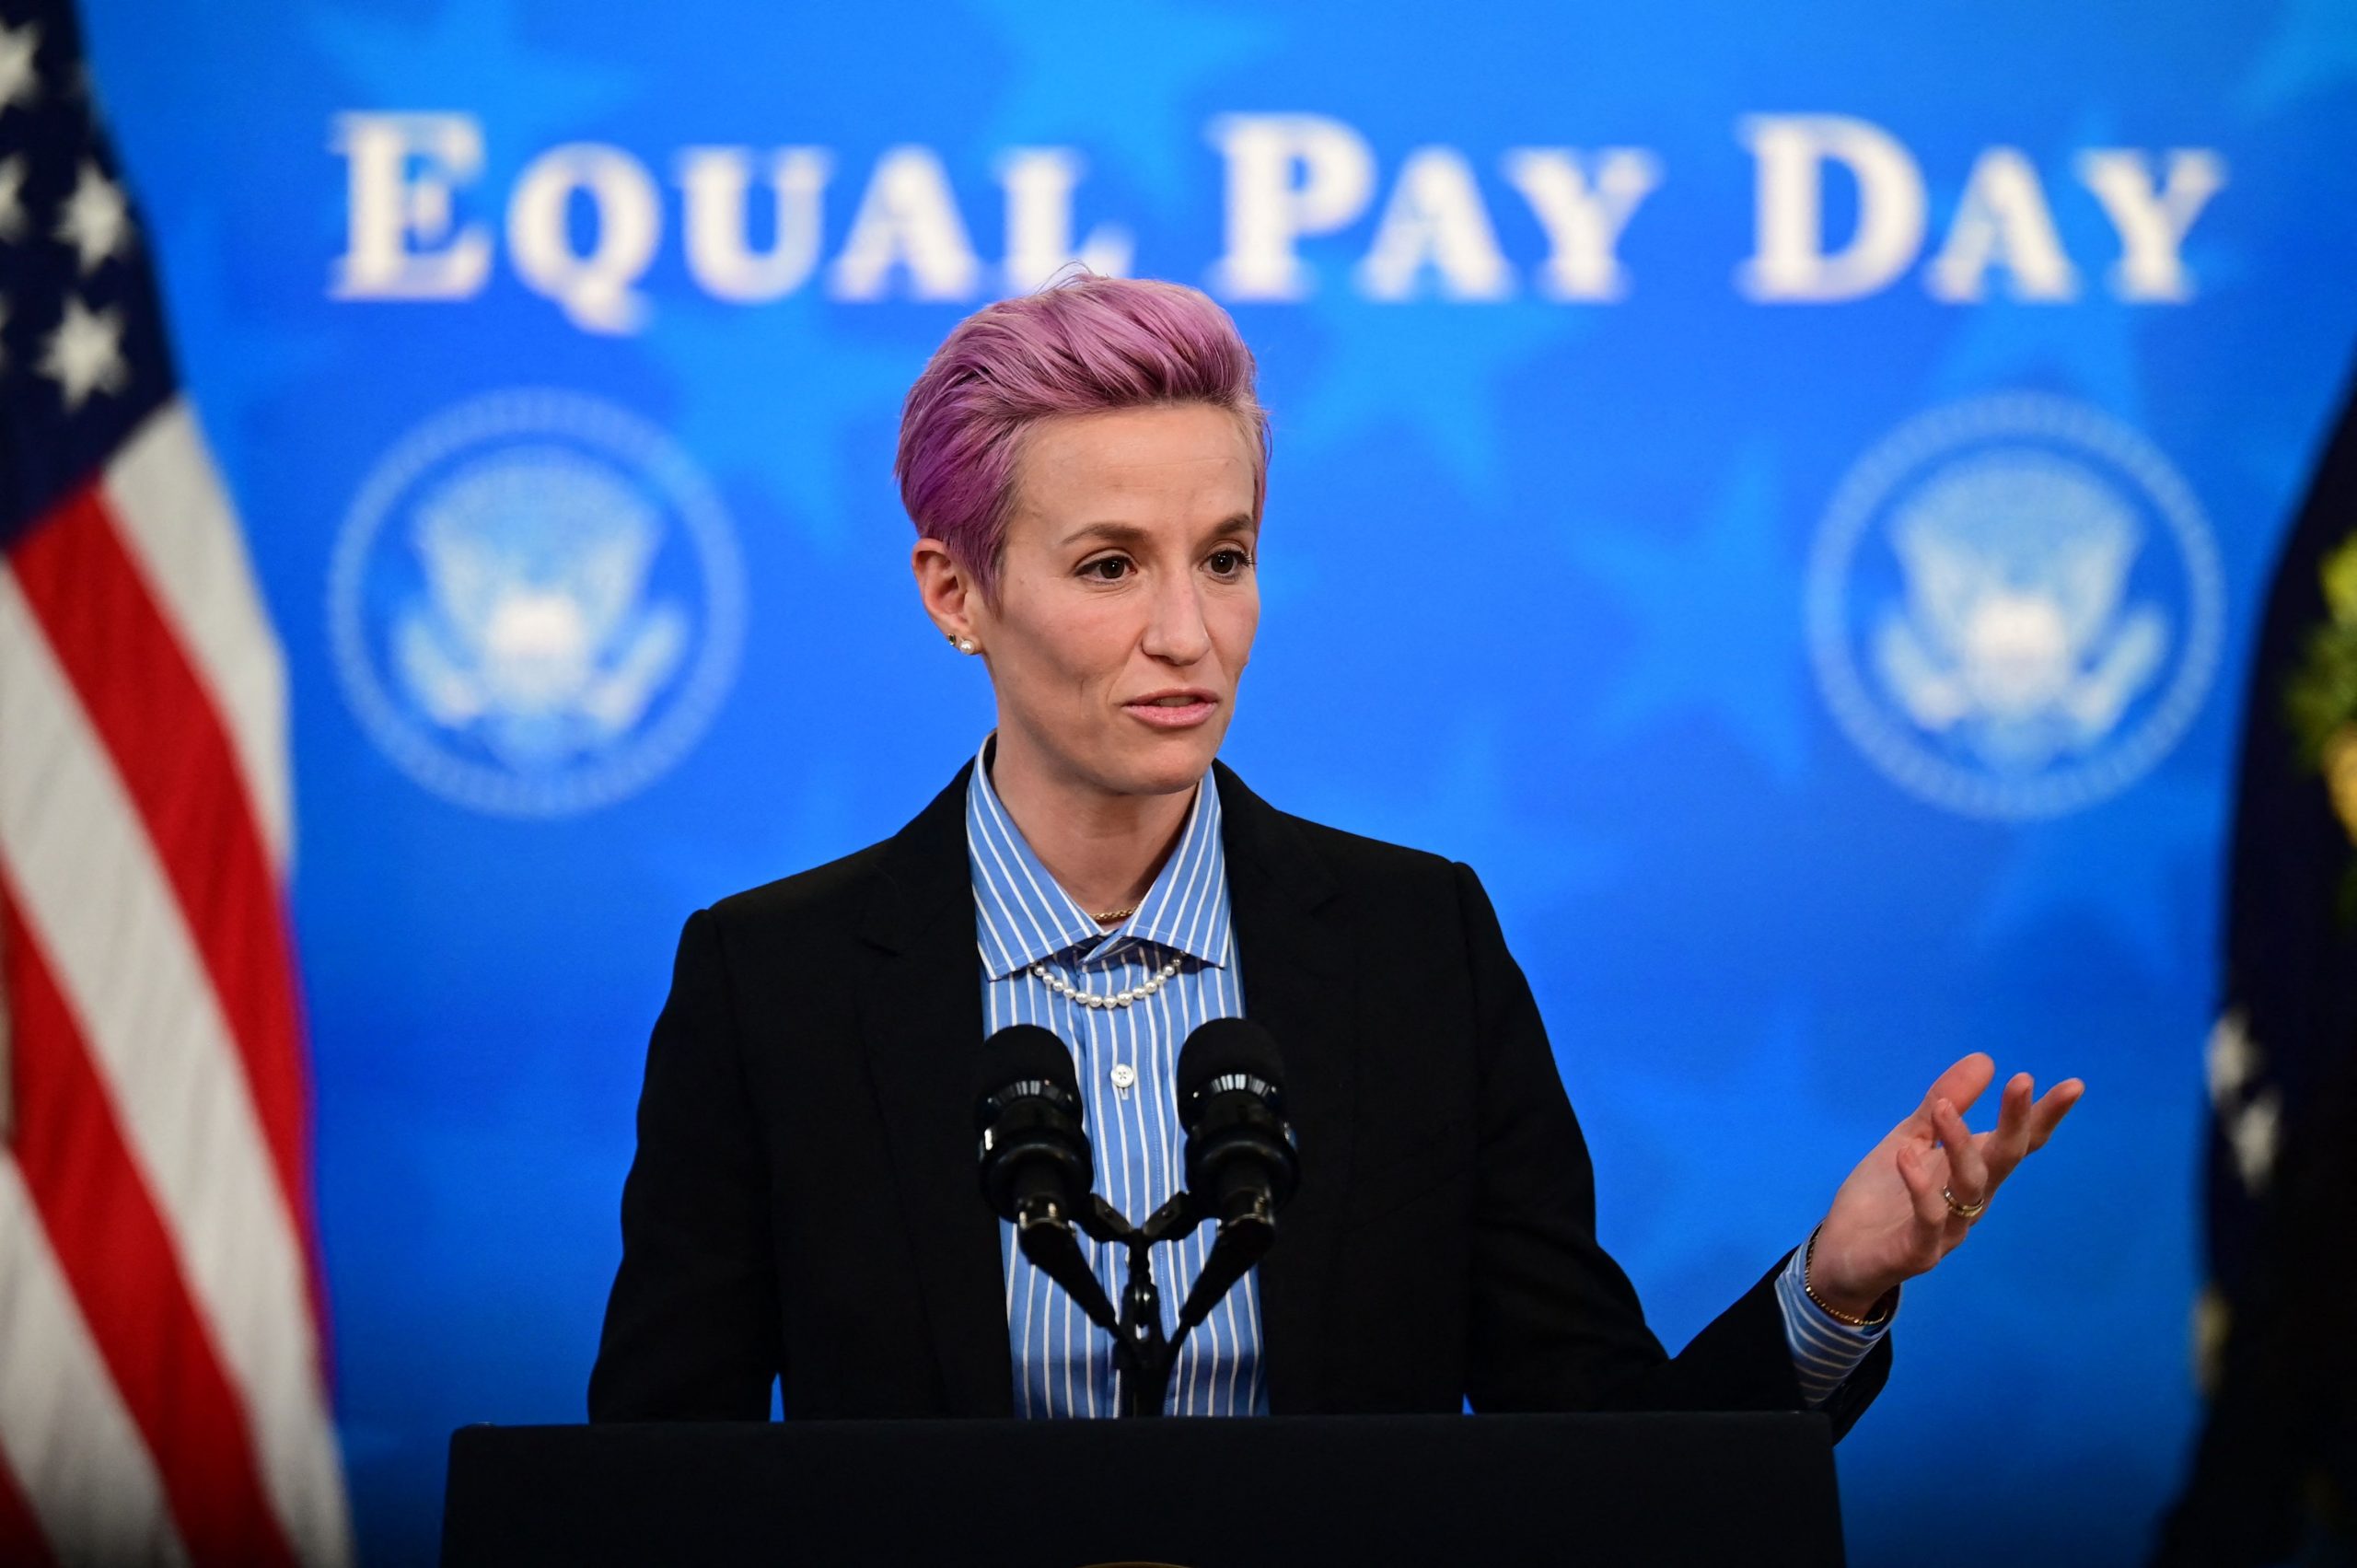 ‘Simply cannot outperform inequality’: Megan Rapinoe at White House event